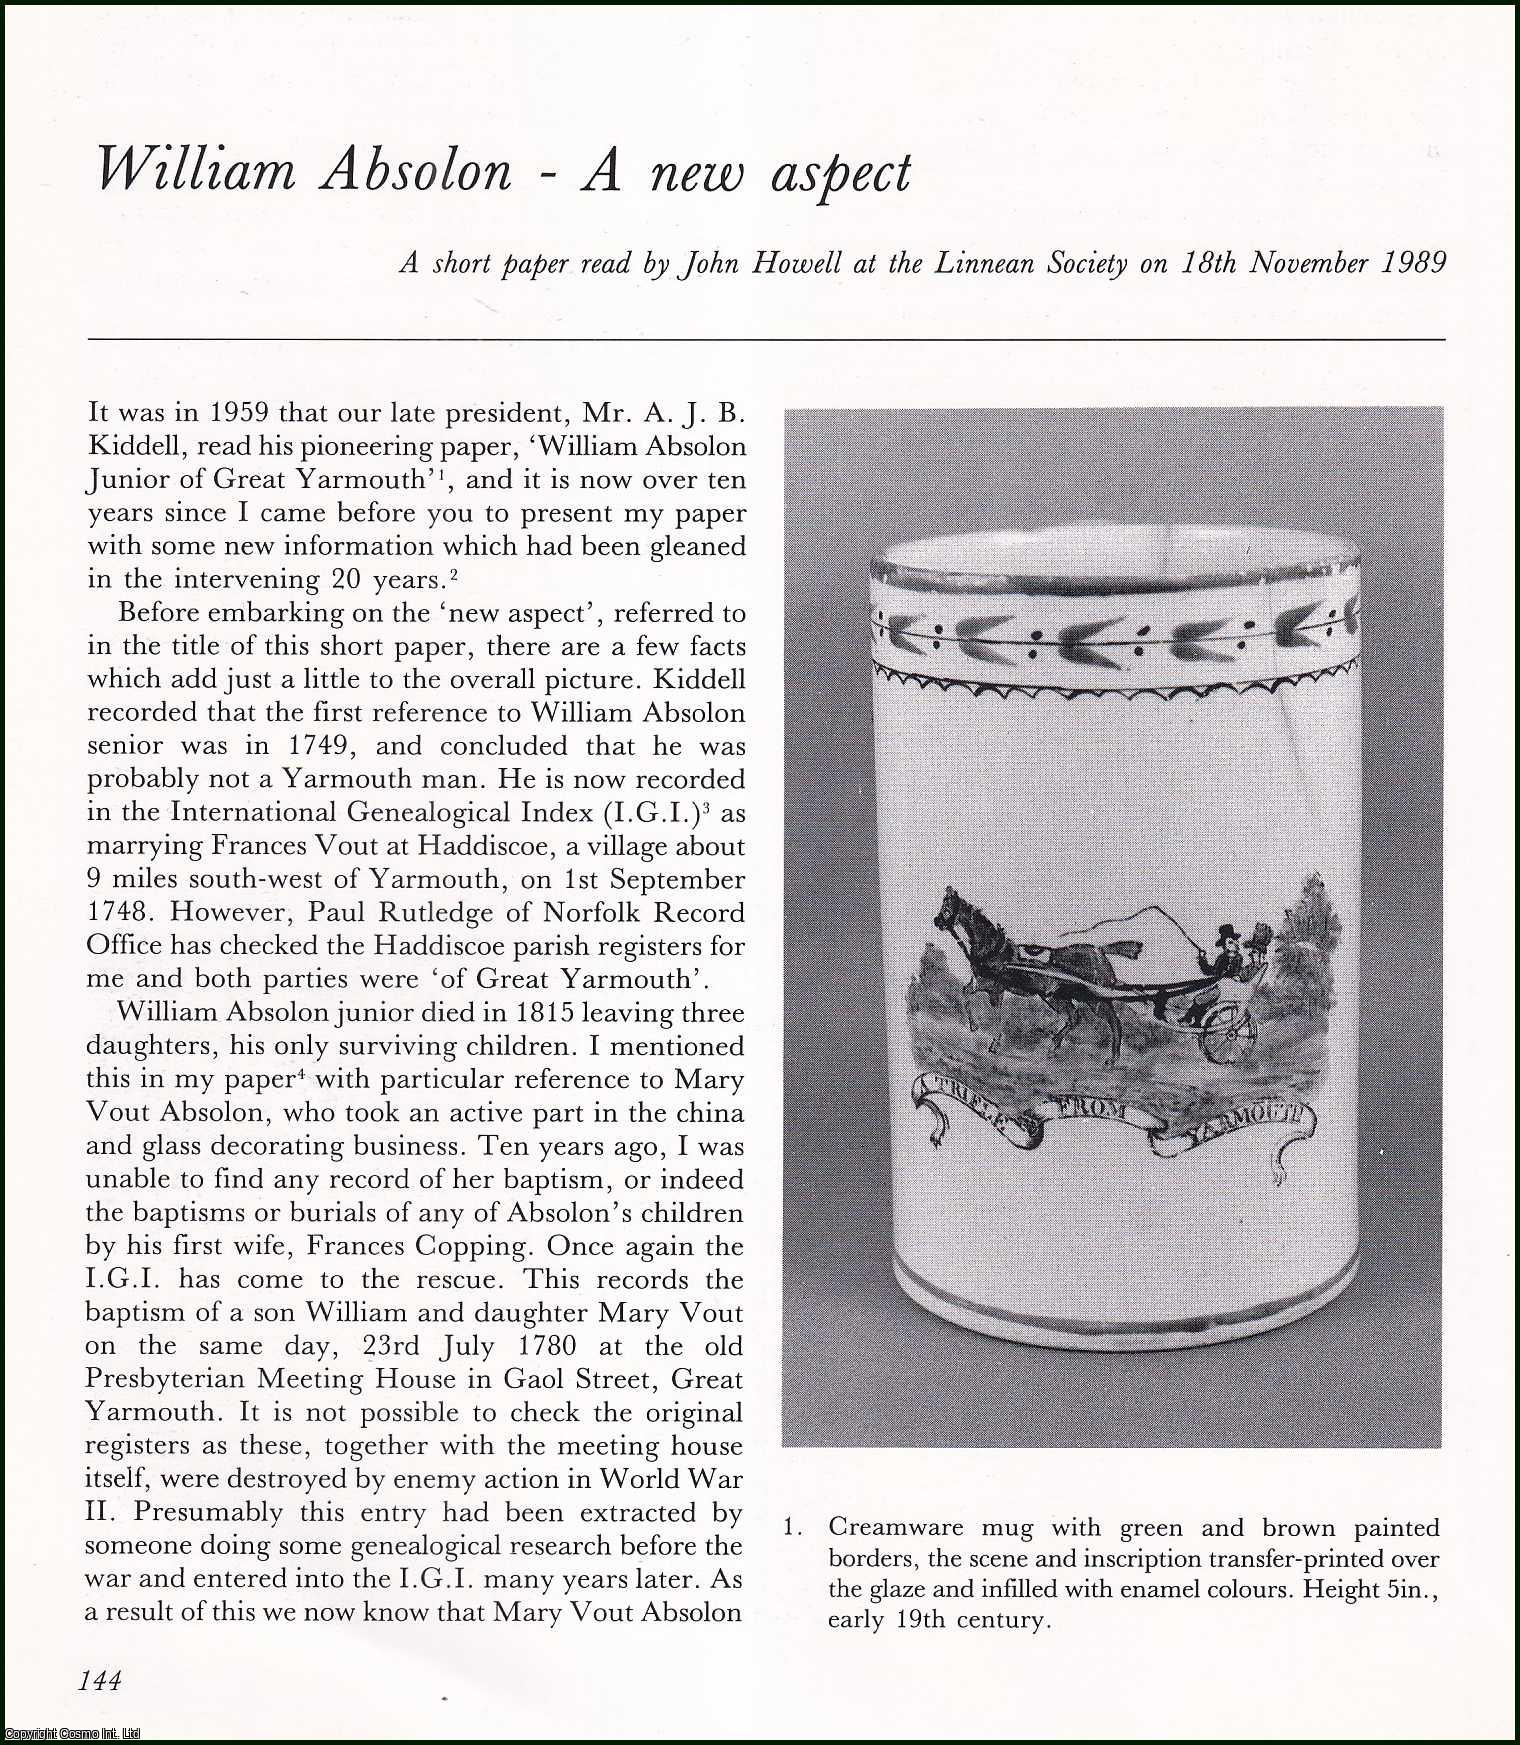 John Howell - William Absolon of Great Yarmouth : A new aspect. An original article from the English Ceramic Circle, 1991.